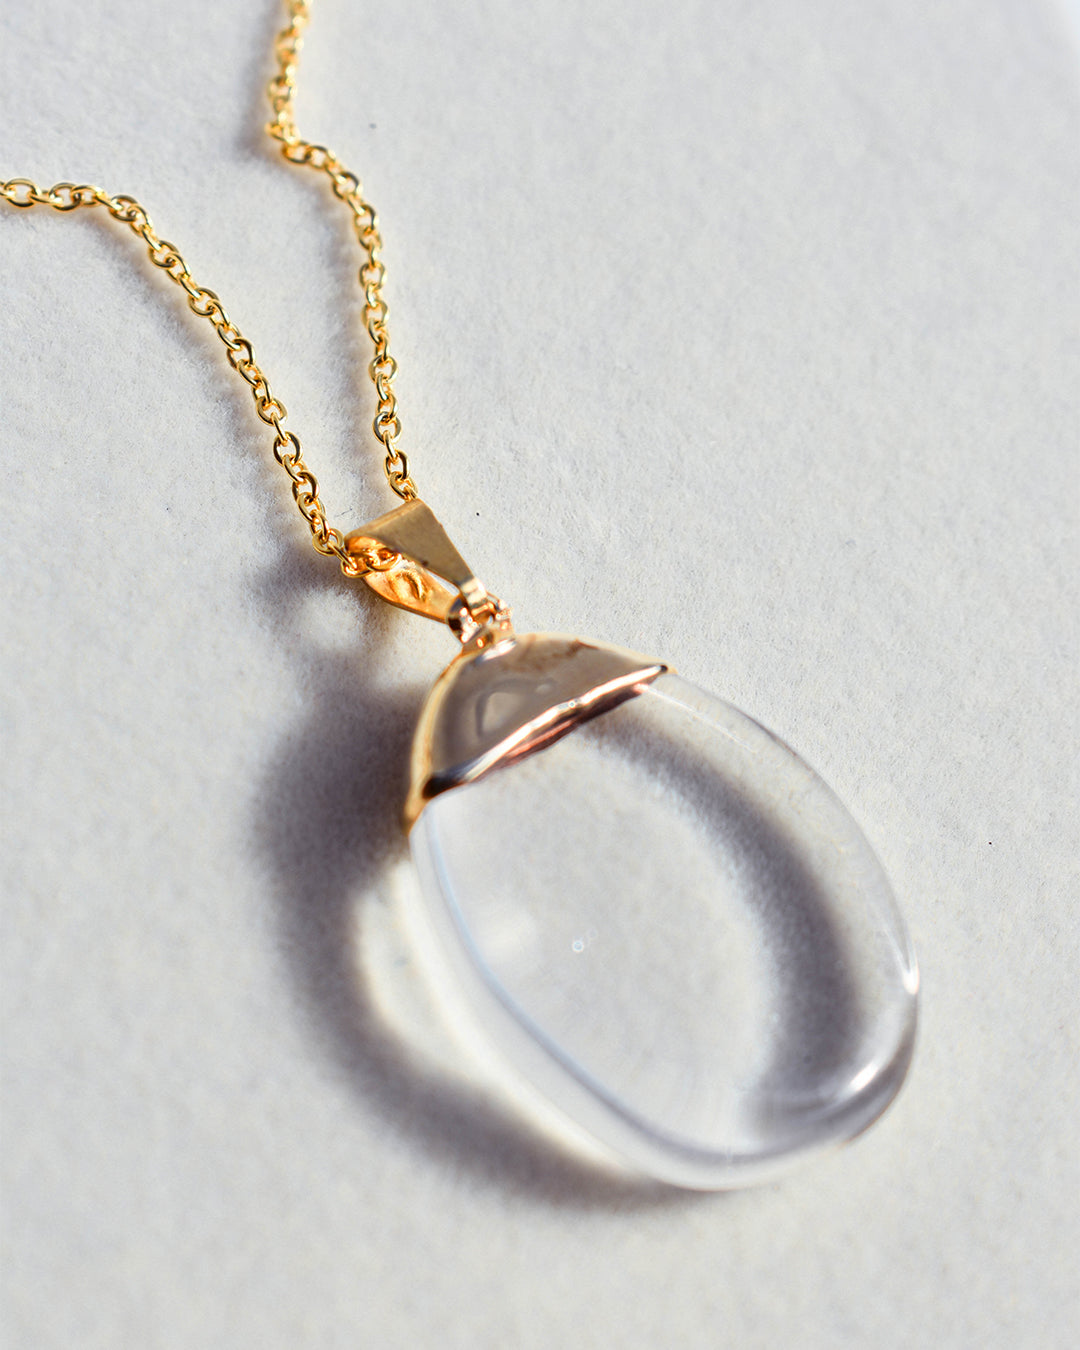 Gold plated chain with Clear Quartz pendant